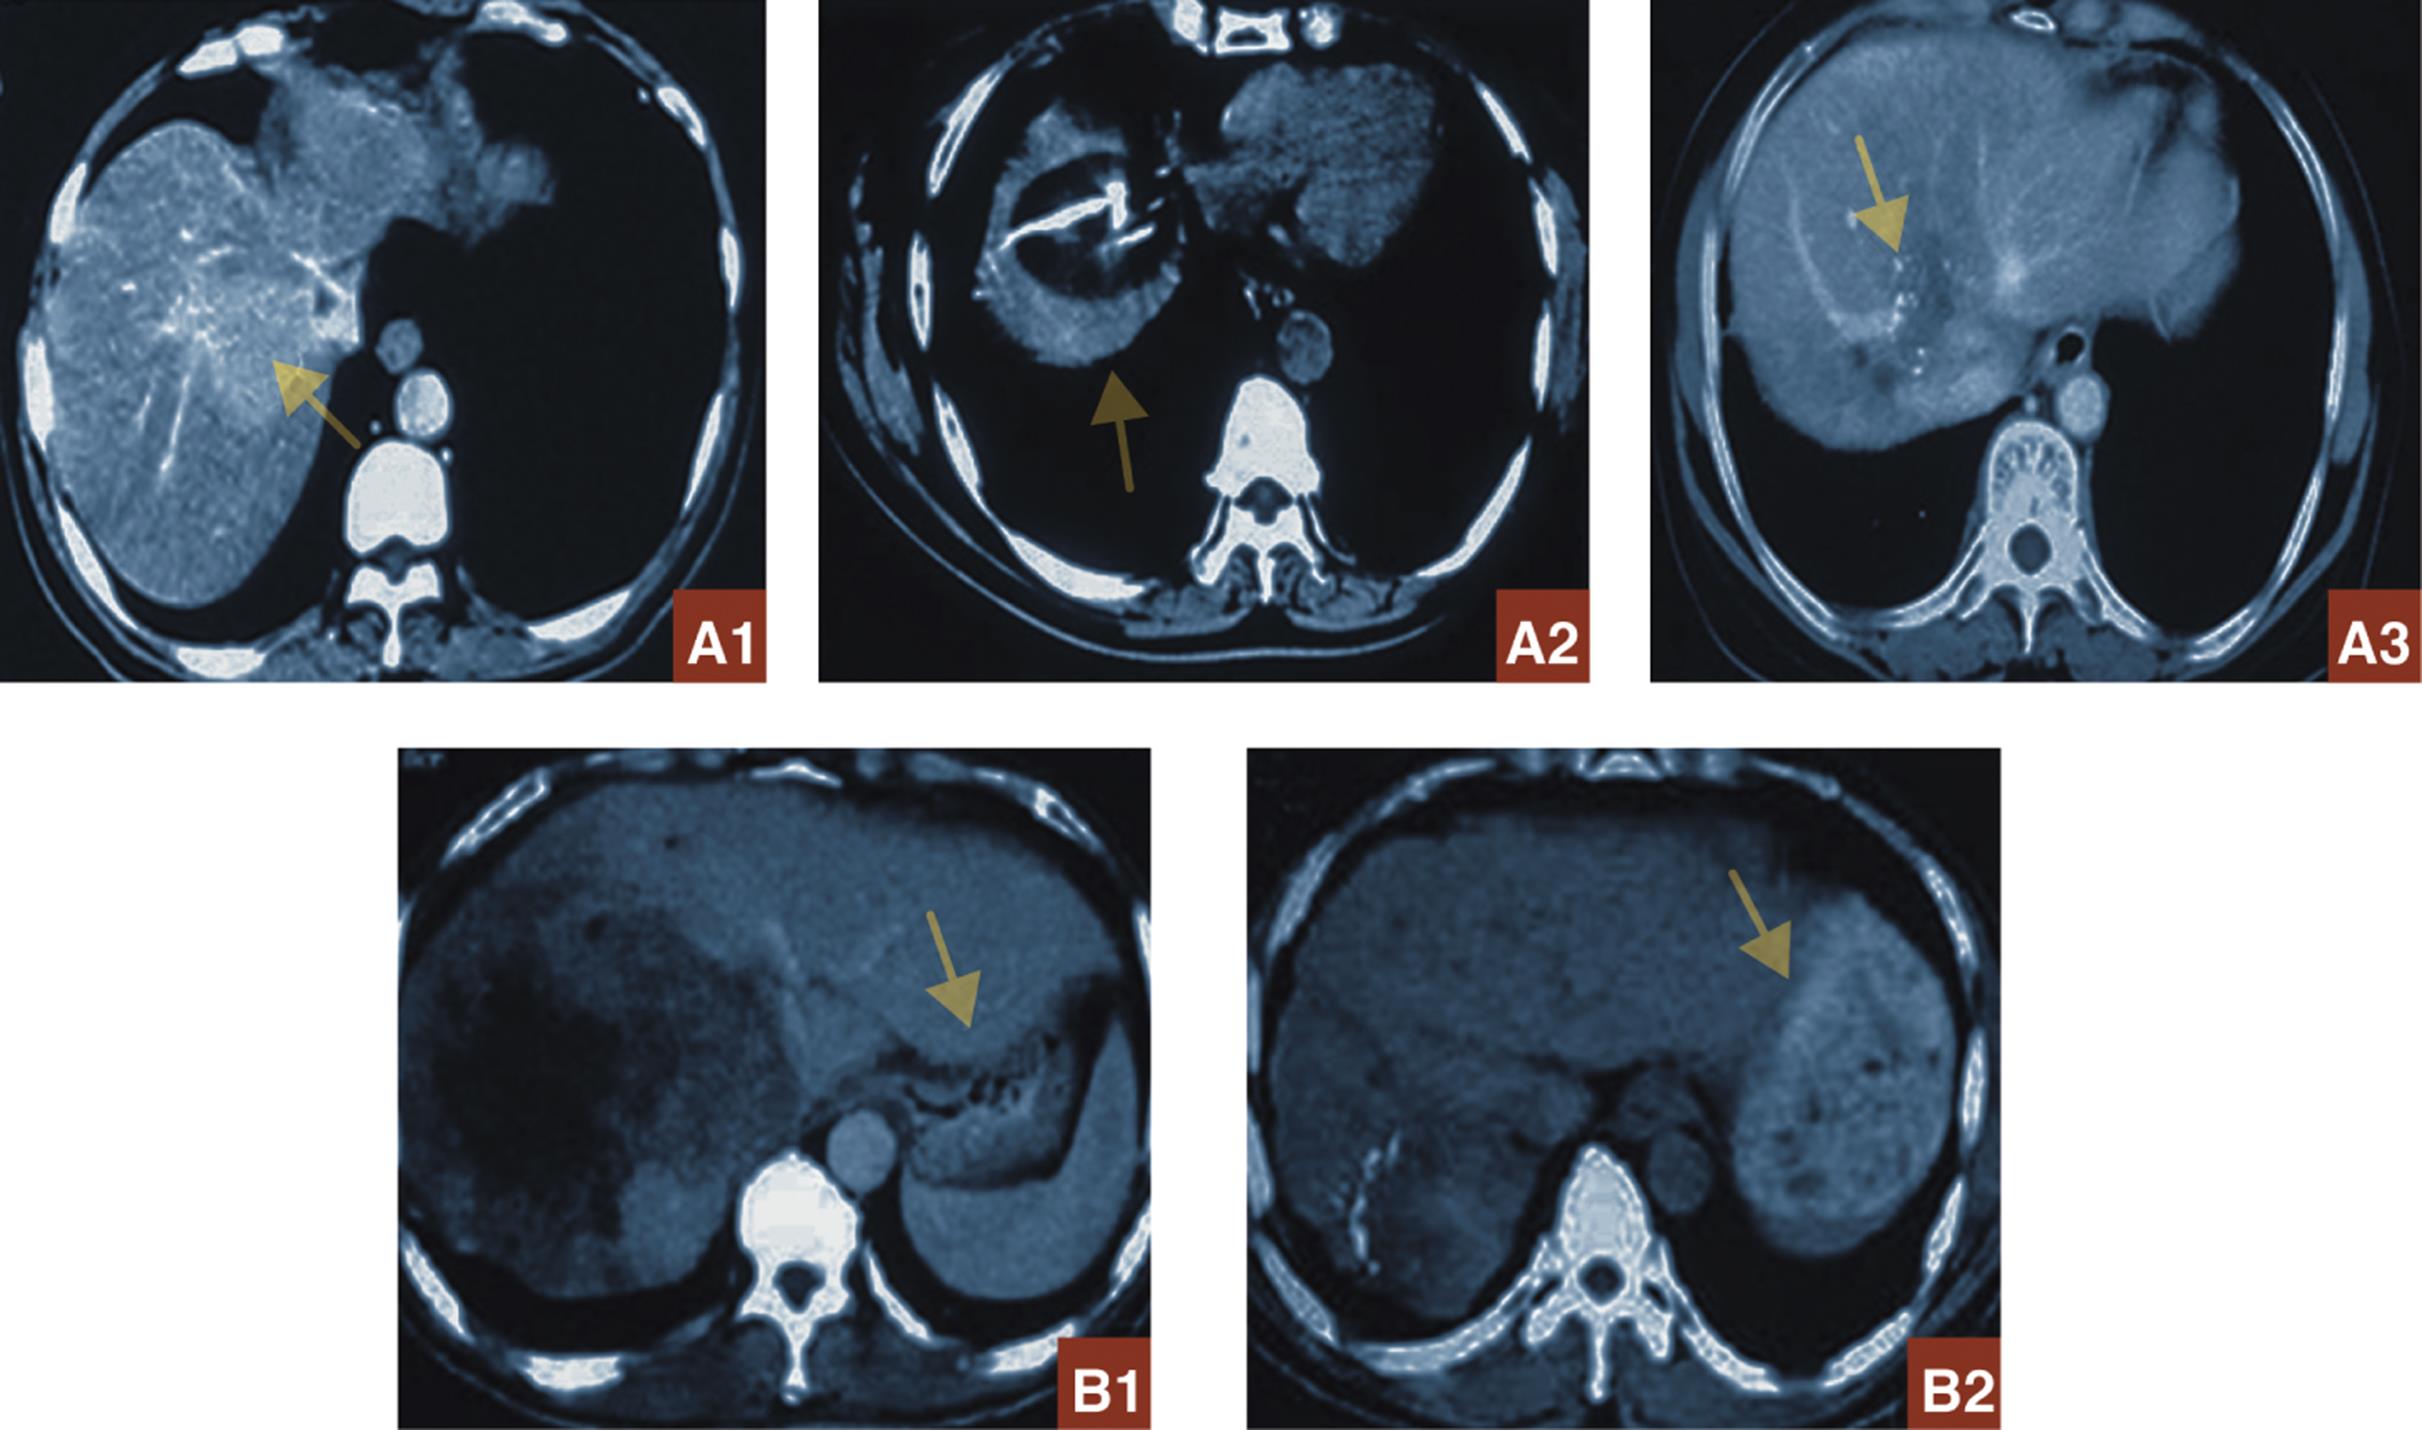 Liver imaging in two patients (A and B) with hepatic colorectal metastases.